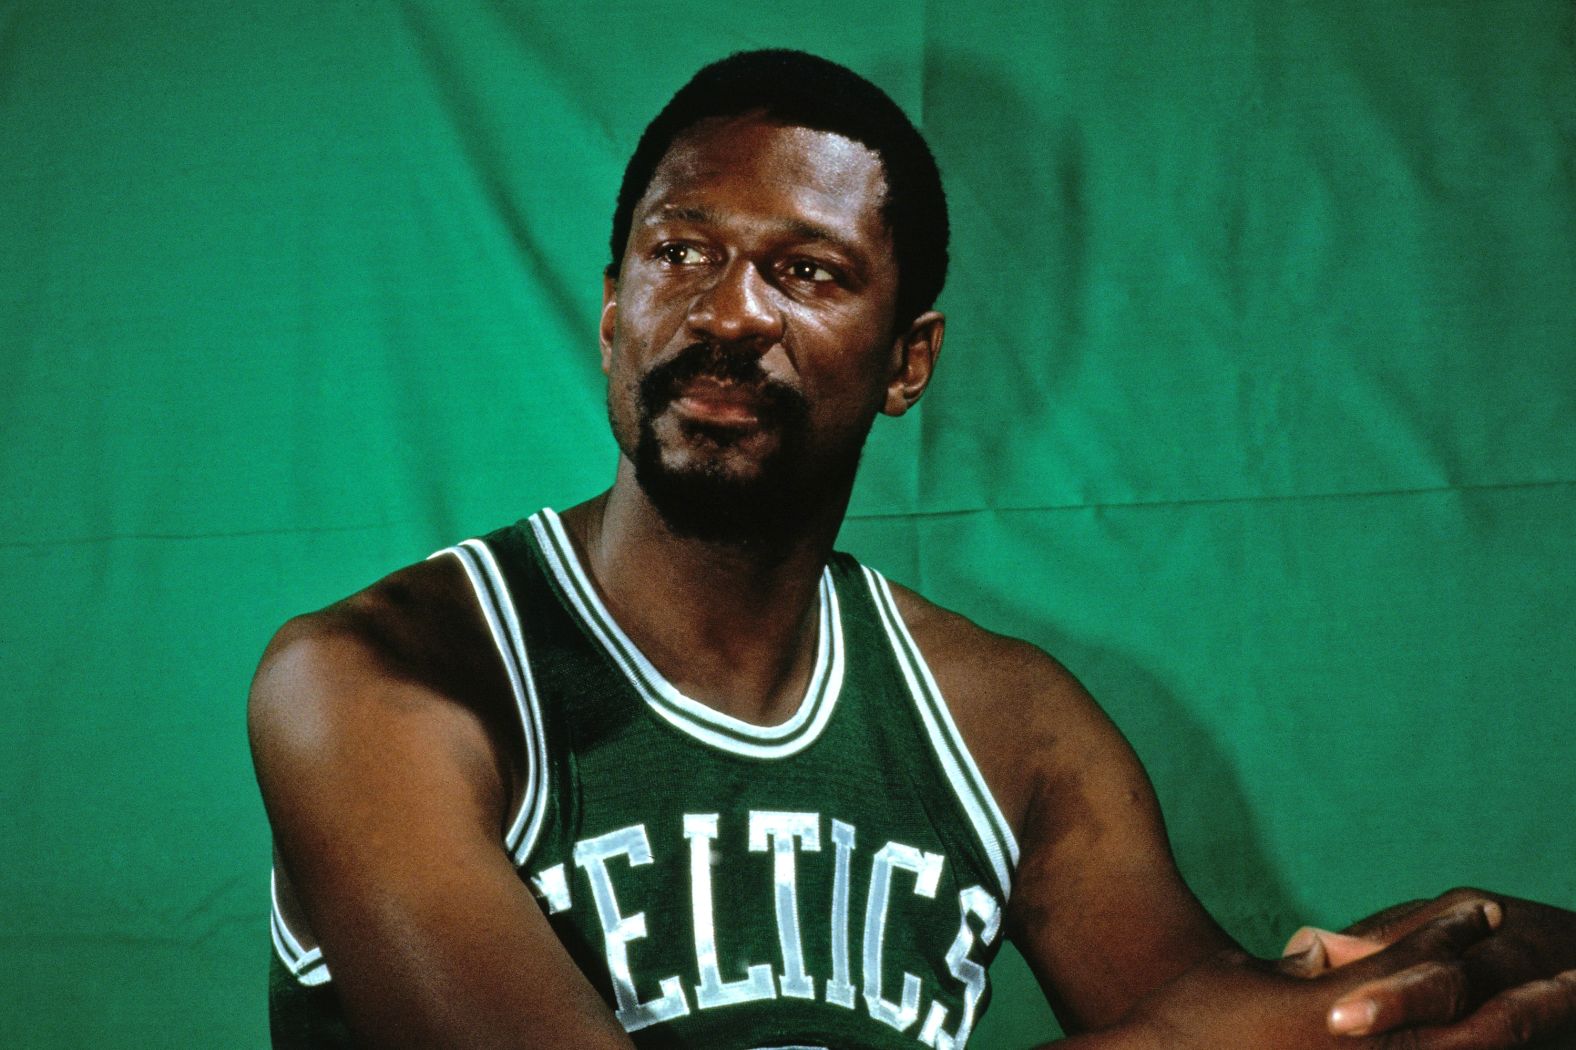 NBA legend <a href="index.php?page=&url=https%3A%2F%2Fwww.cnn.com%2F2022%2F07%2F31%2Fsport%2Fbill-russell-nba-legend-dies-spt-intl%2Findex.html" target="_blank">Bill Russell,</a> an 11-time NBA champion with the Boston Celtics and the first Black head coach in the league, died on July 31, according to a family statement from his verified Twitter account. He was 88. In addition to his sporting achievements, Russell was one of sport's leading civil rights activists and marched alongside Martin Luther King Jr. when he gave his "I Have a Dream" speech in 1963.